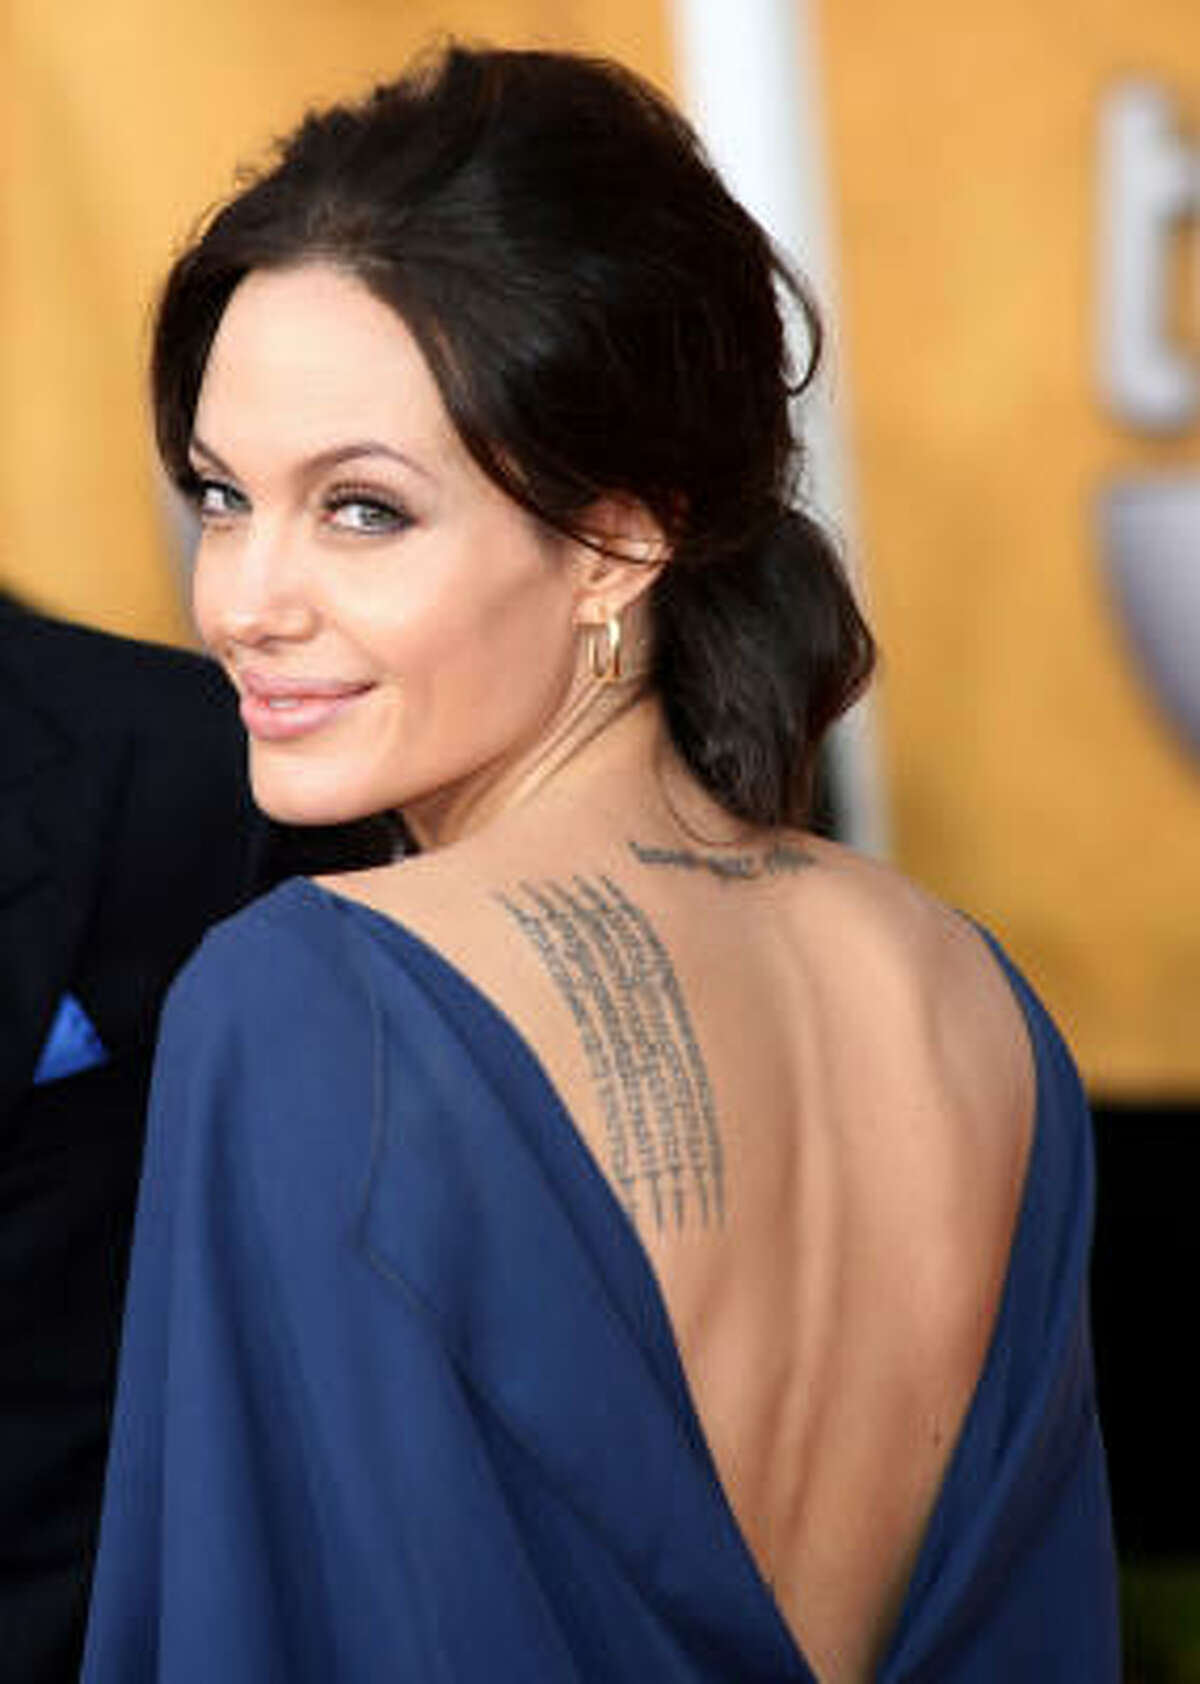 Angelina Jolie. Because we think her attempts to create her own rainbow tribe are sheer narcissism.